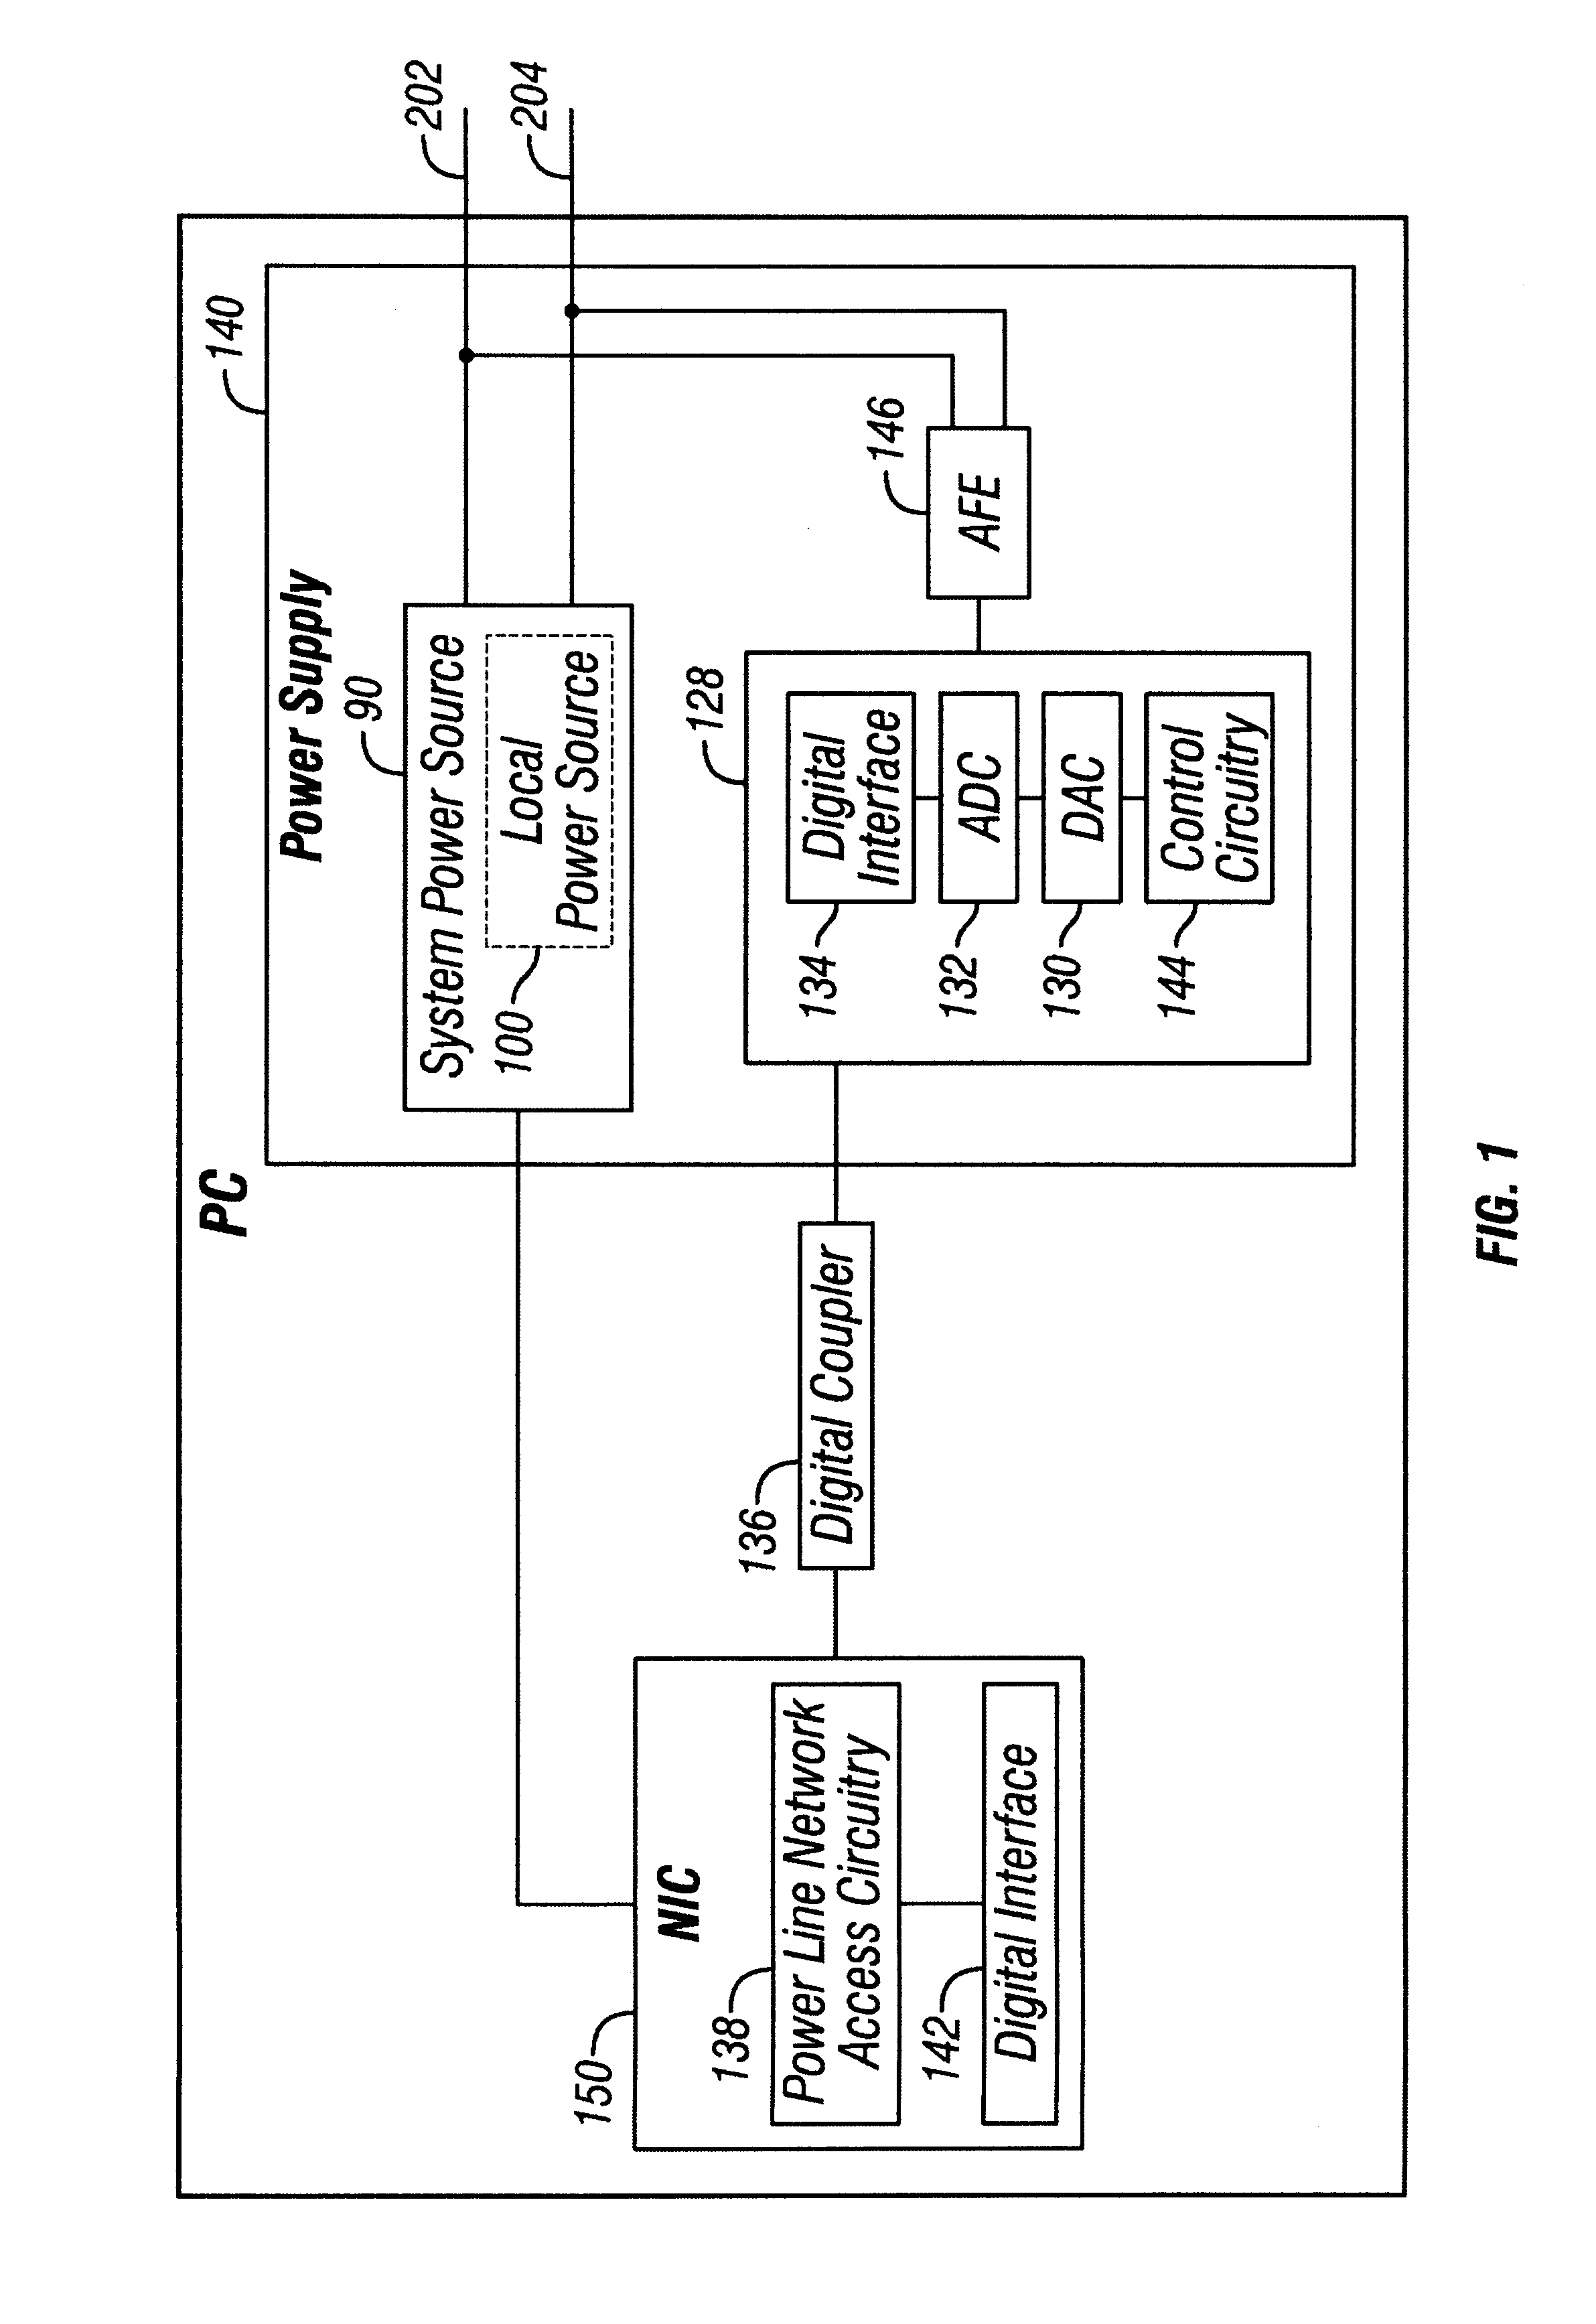 Power supply with digital data coupling for power-line networking